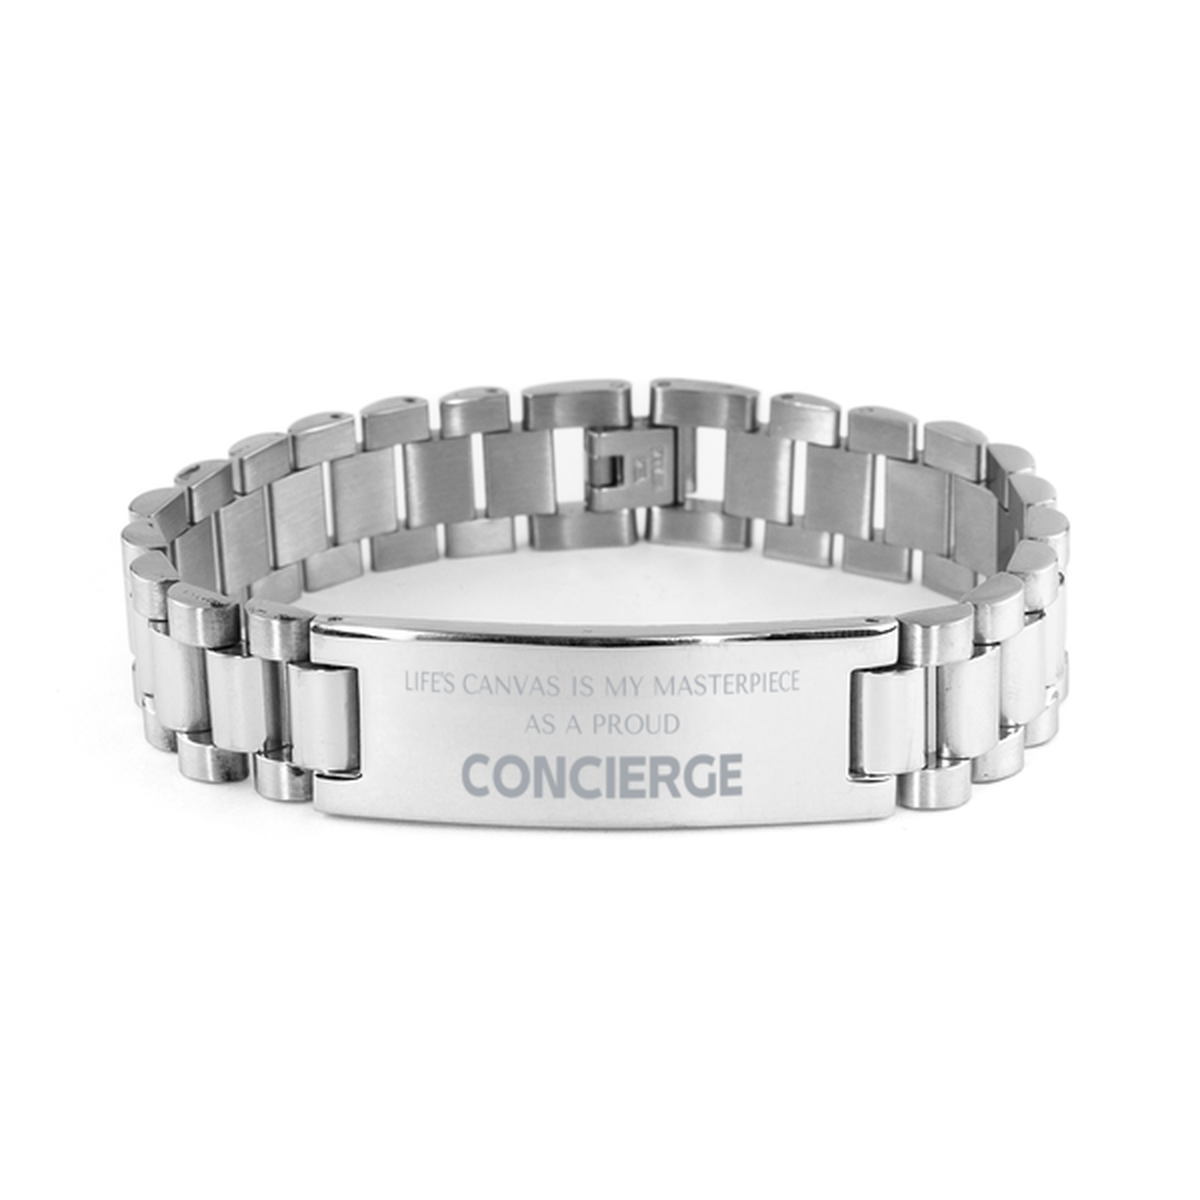 Proud Concierge Gifts, Life's canvas is my masterpiece, Epic Birthday Christmas Unique Ladder Stainless Steel Bracelet For Concierge, Coworkers, Men, Women, Friends